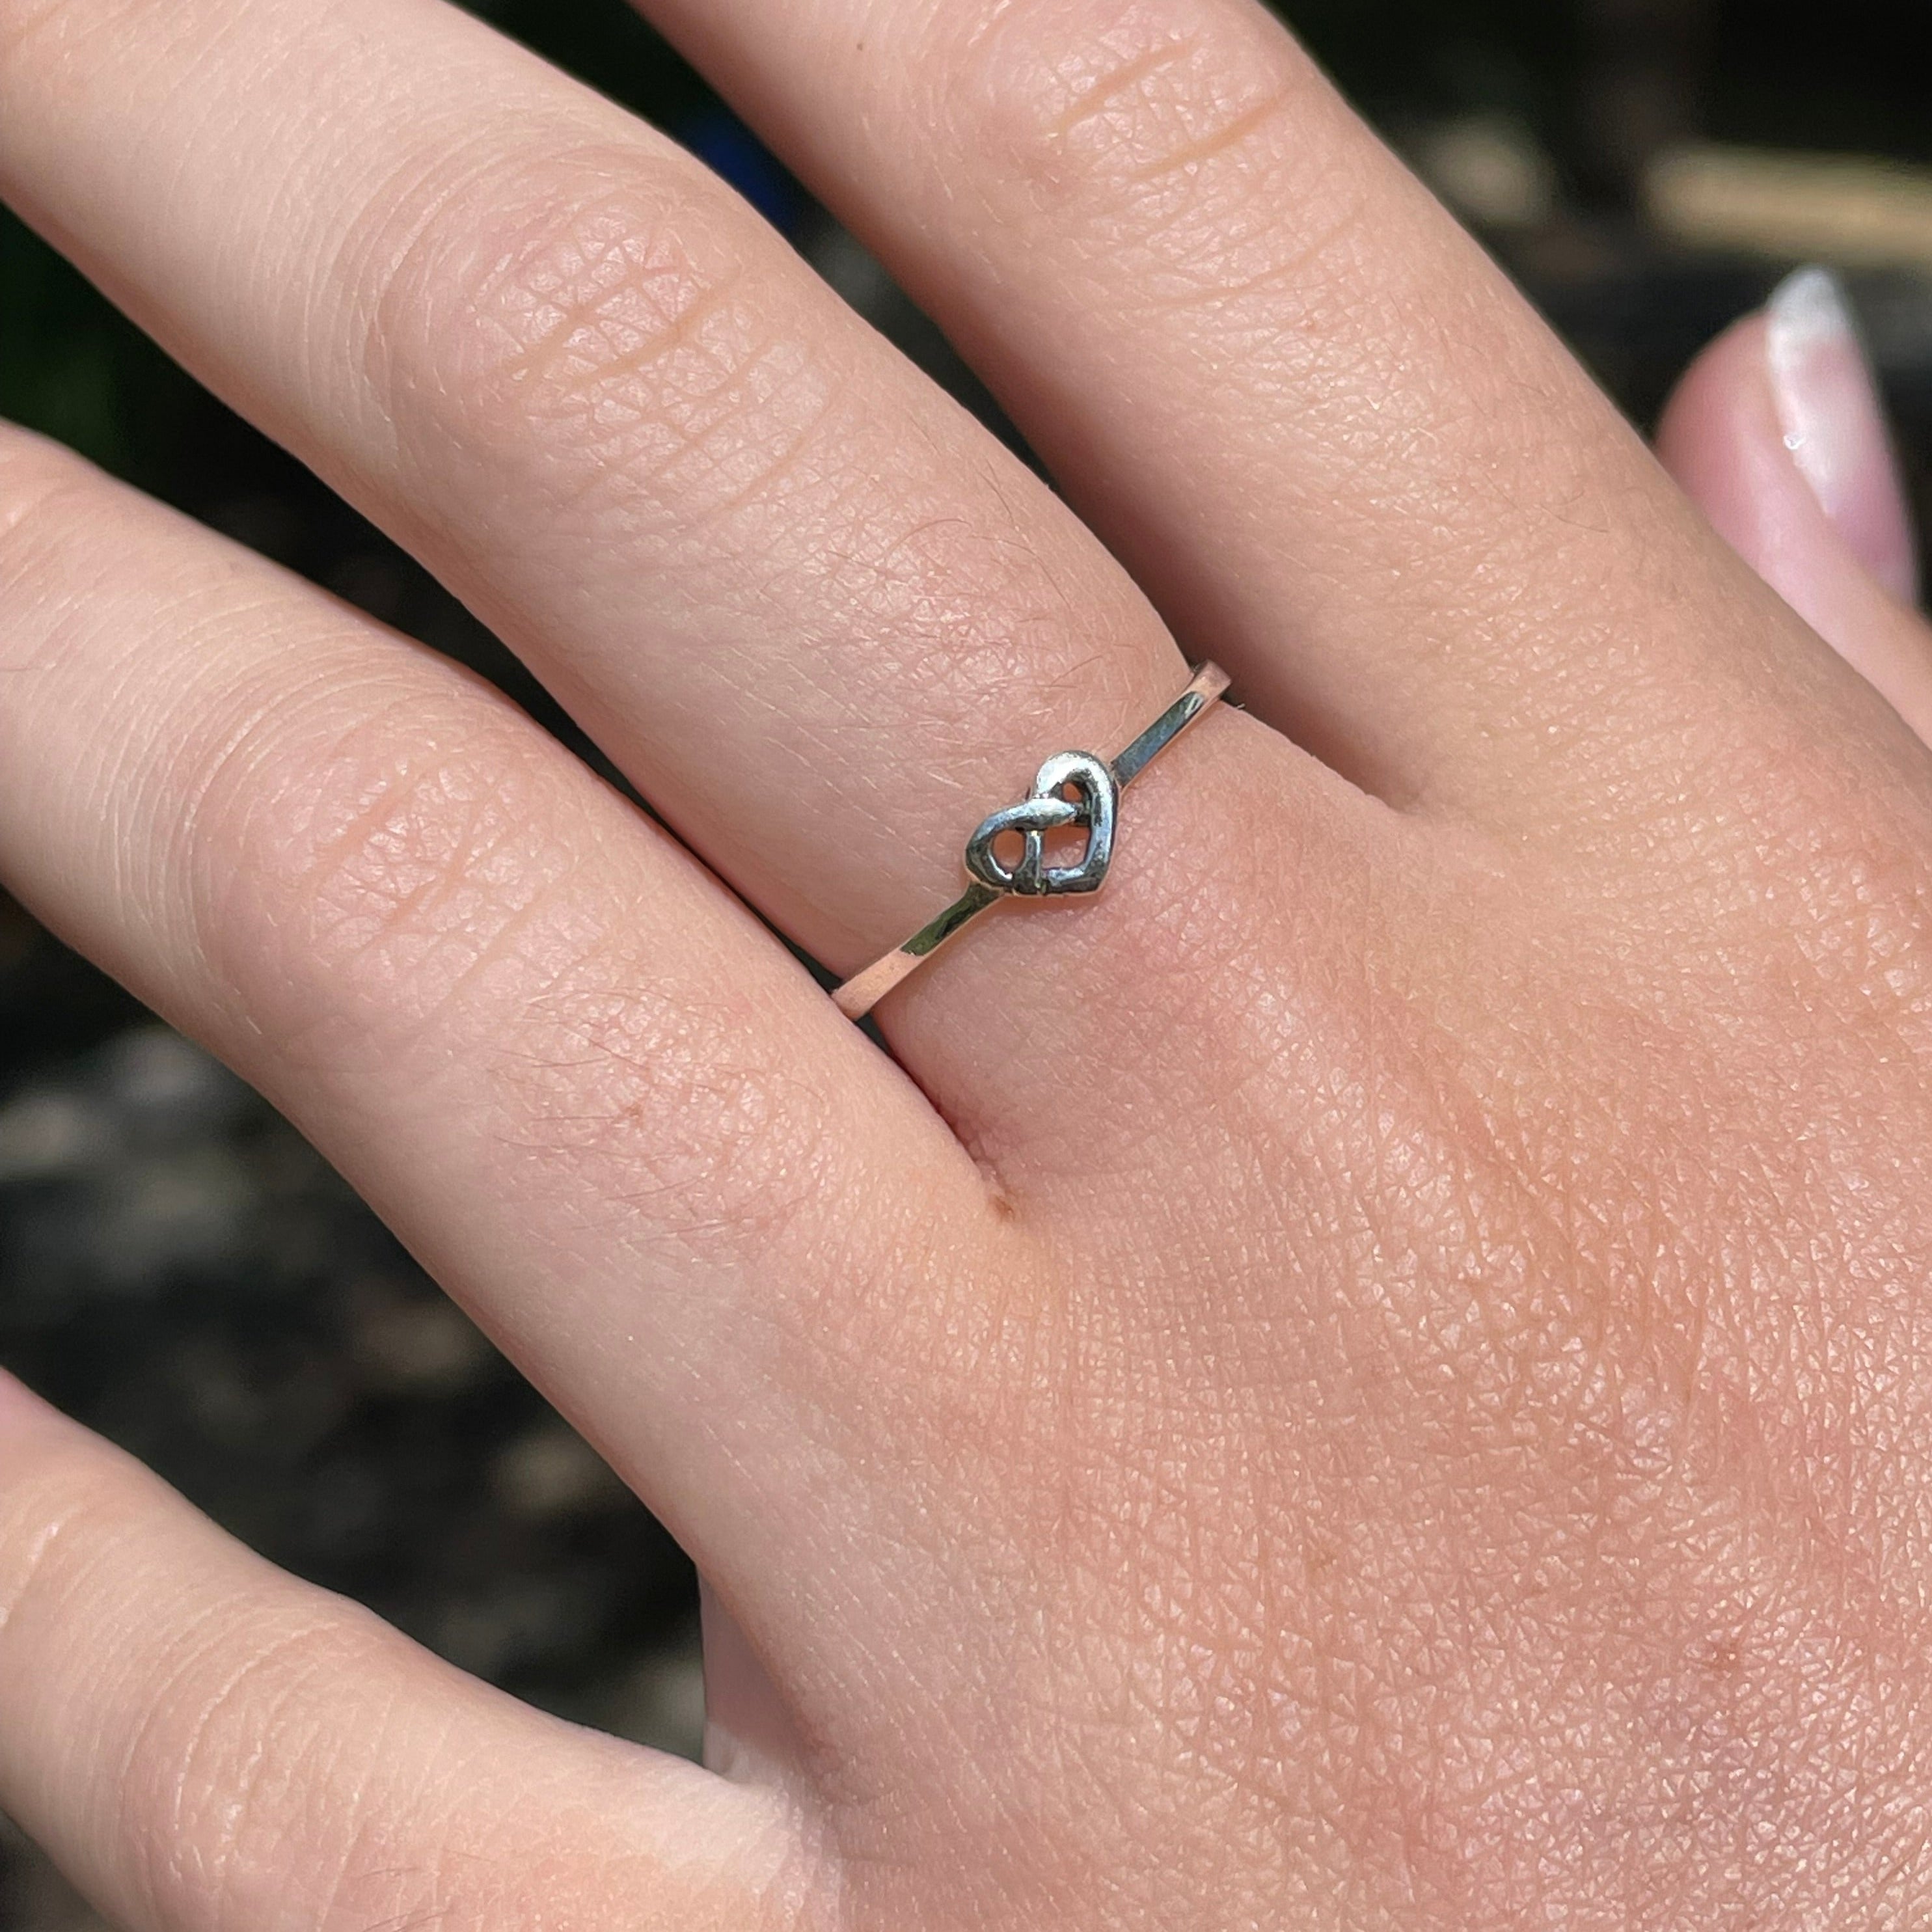 Sun Moon Star Ring, Matching Sun Moon Ring, Moon Star Ring Set, Purity Rings,  Friendship Rings, BFF Rings, Mother Daughter Rings, Love Rings - Etsy